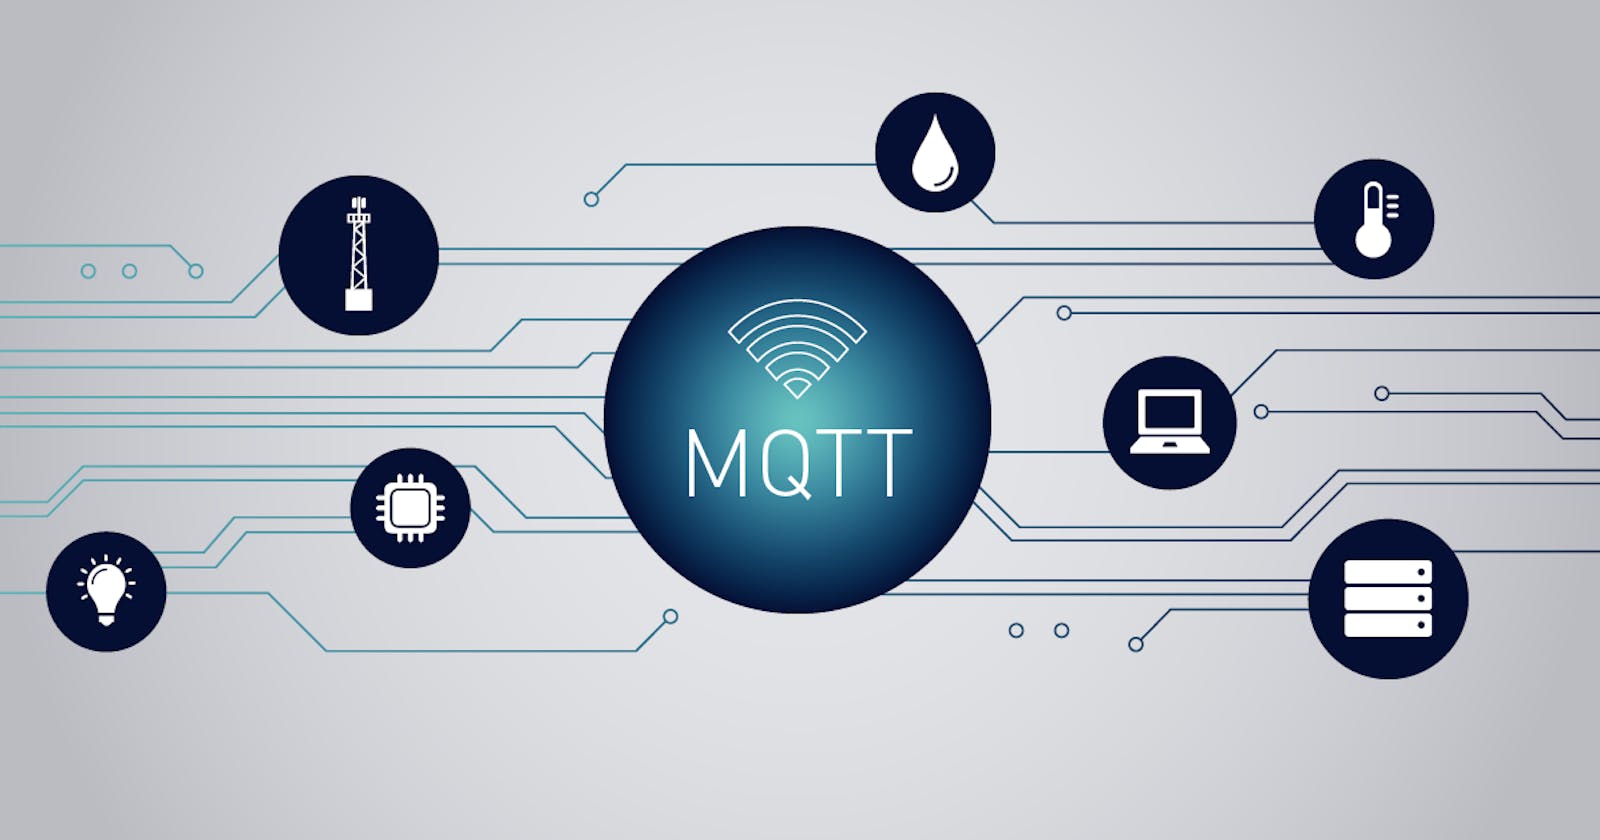 How to create self-managed RabbitMQ cluster with MQTT